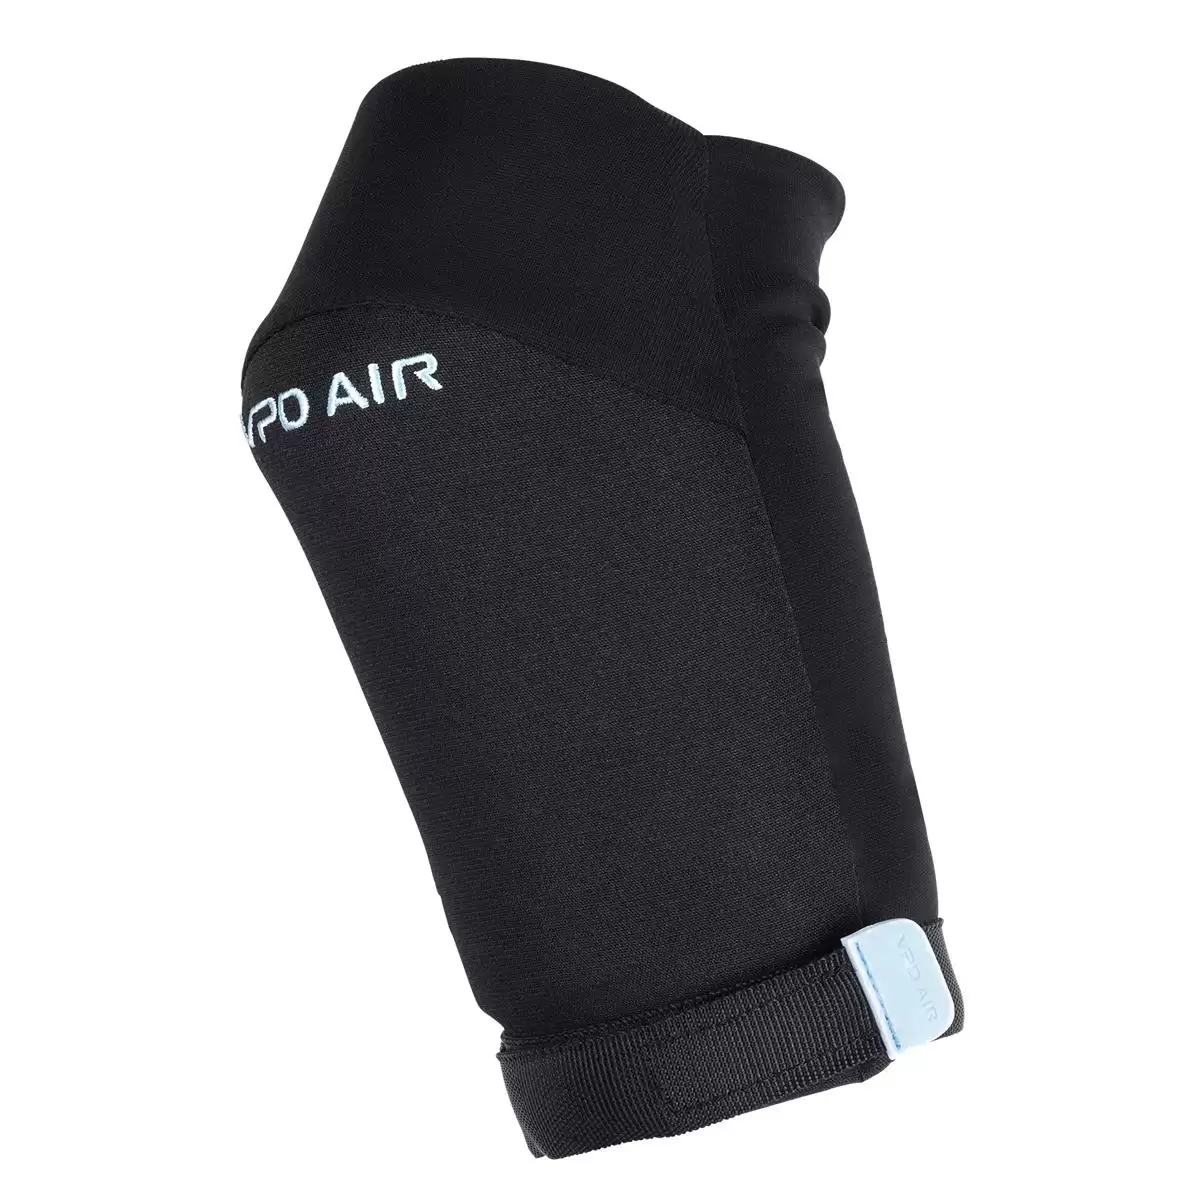 Joint VPD Air Elbow pads Black Size XL #1